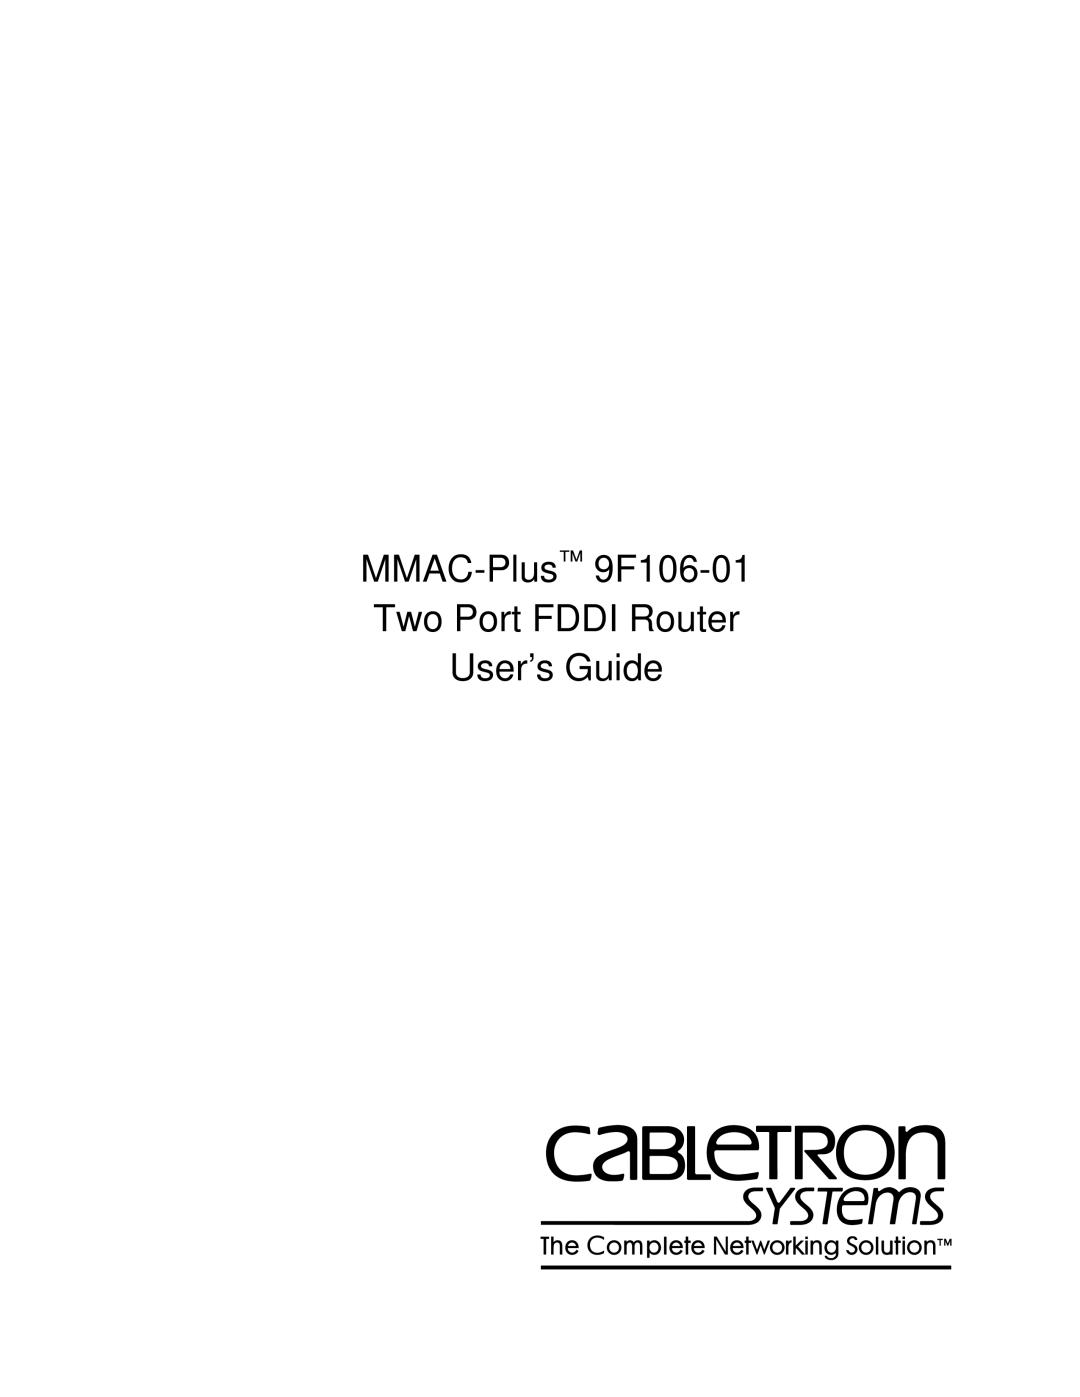 Cabletron Systems manual MMAC-Plus 9F106-01, Two Port FDDI Router User’s Guide 